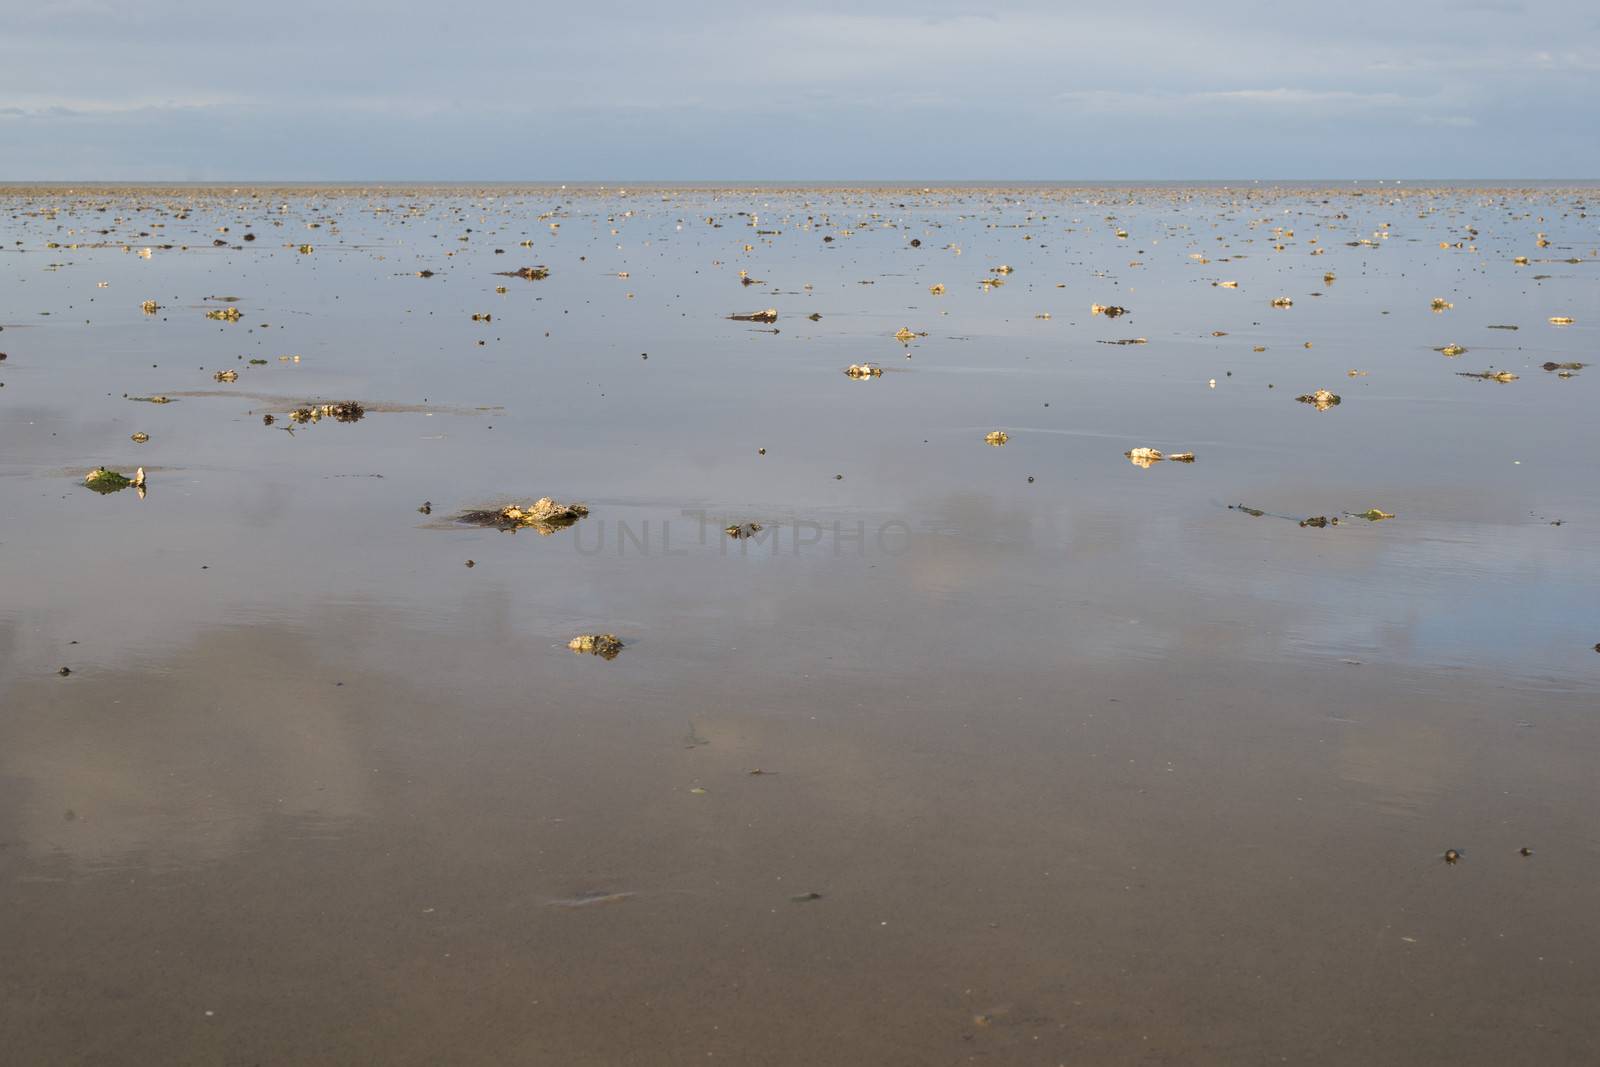 Wadden sea around the island Sylt in Germany at low tide